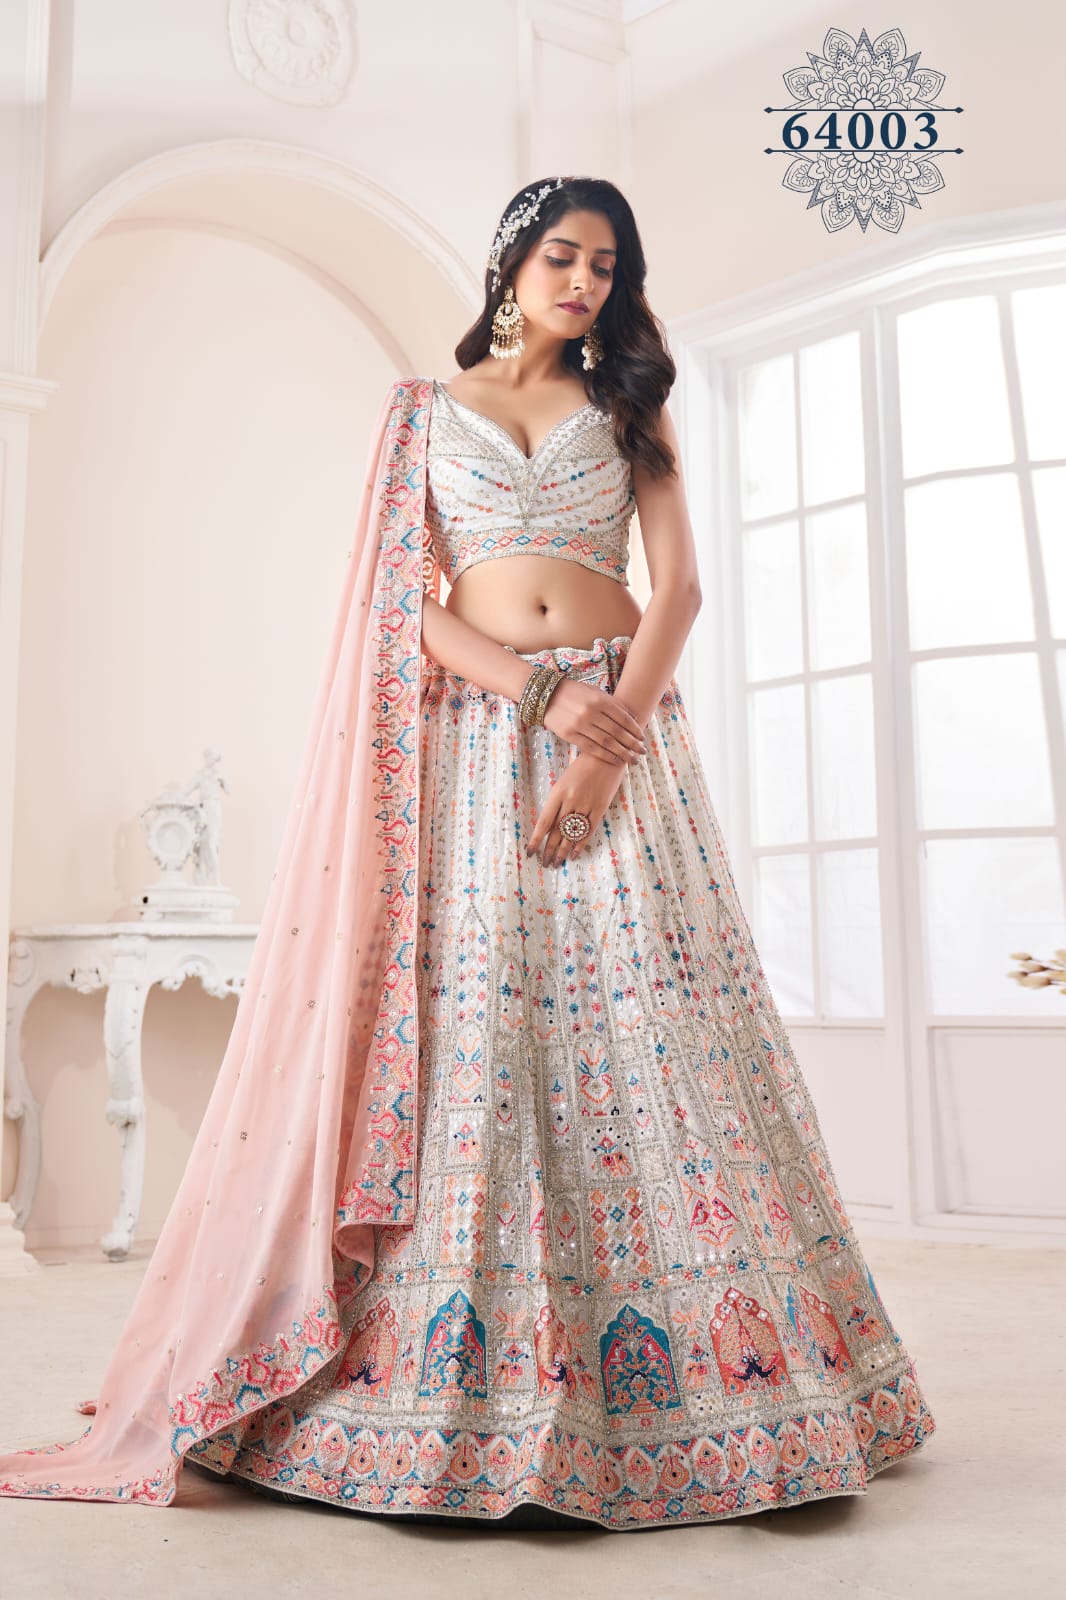 Arya Vol.46 D.No.64003 Designer Occasion Wear Lehenga Anant Tex Exports Private Limited